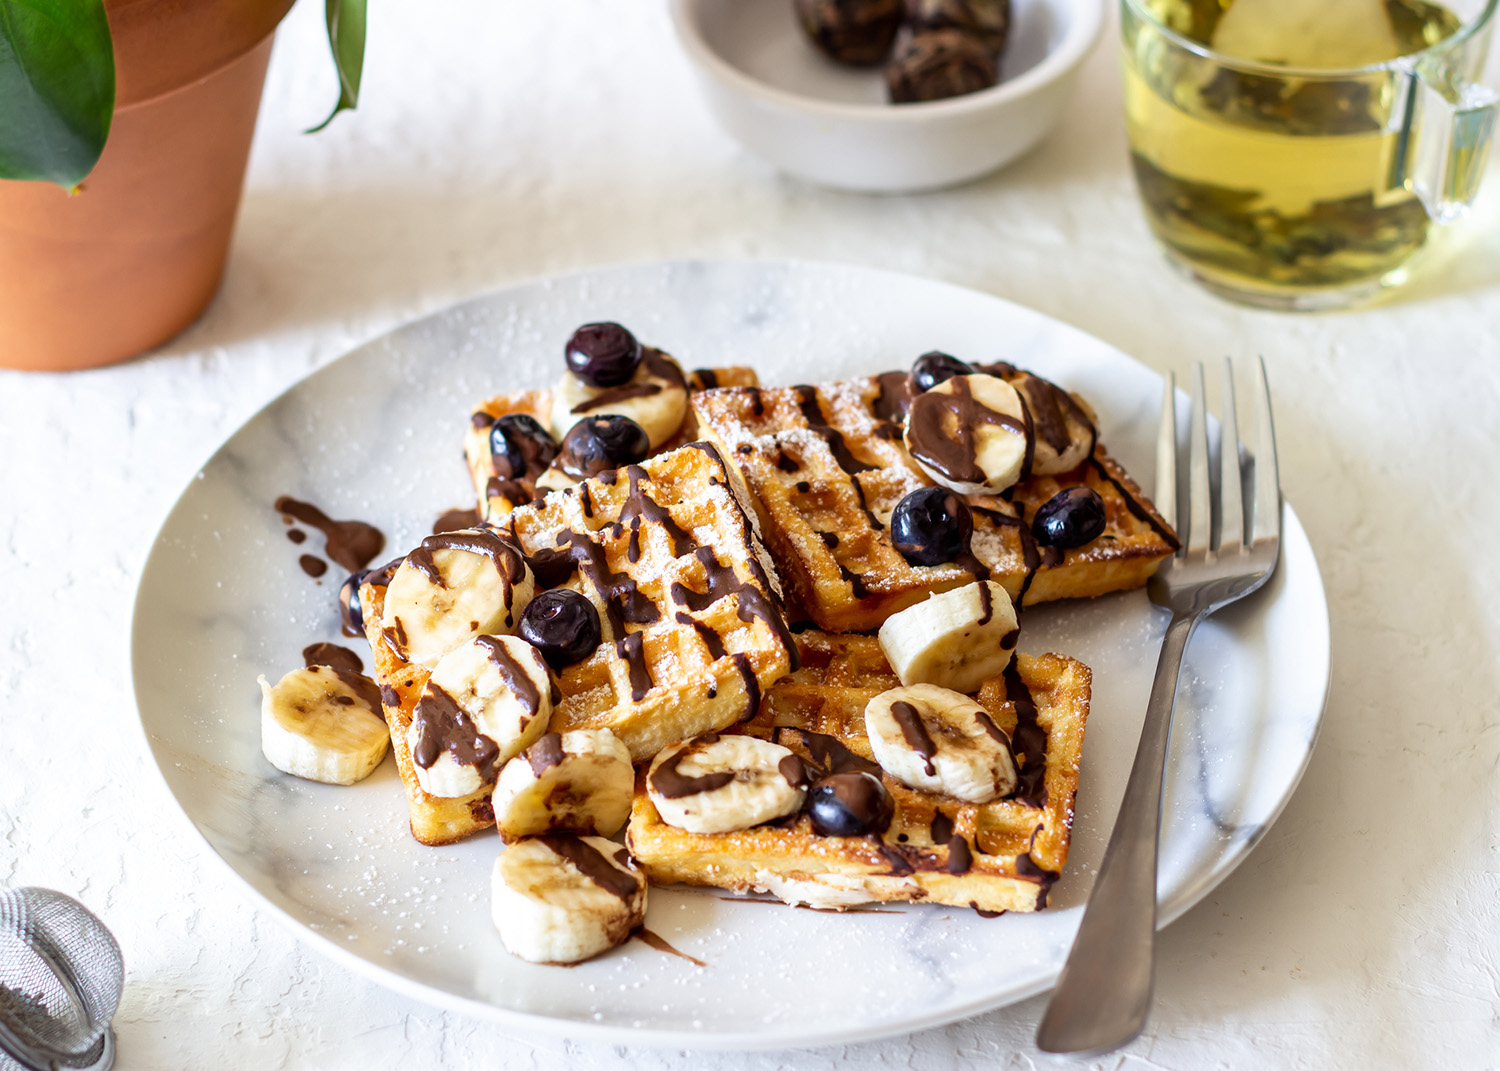 Belgian waffles with blueberries and bananas. National cuisine. Dessert. Recipes.